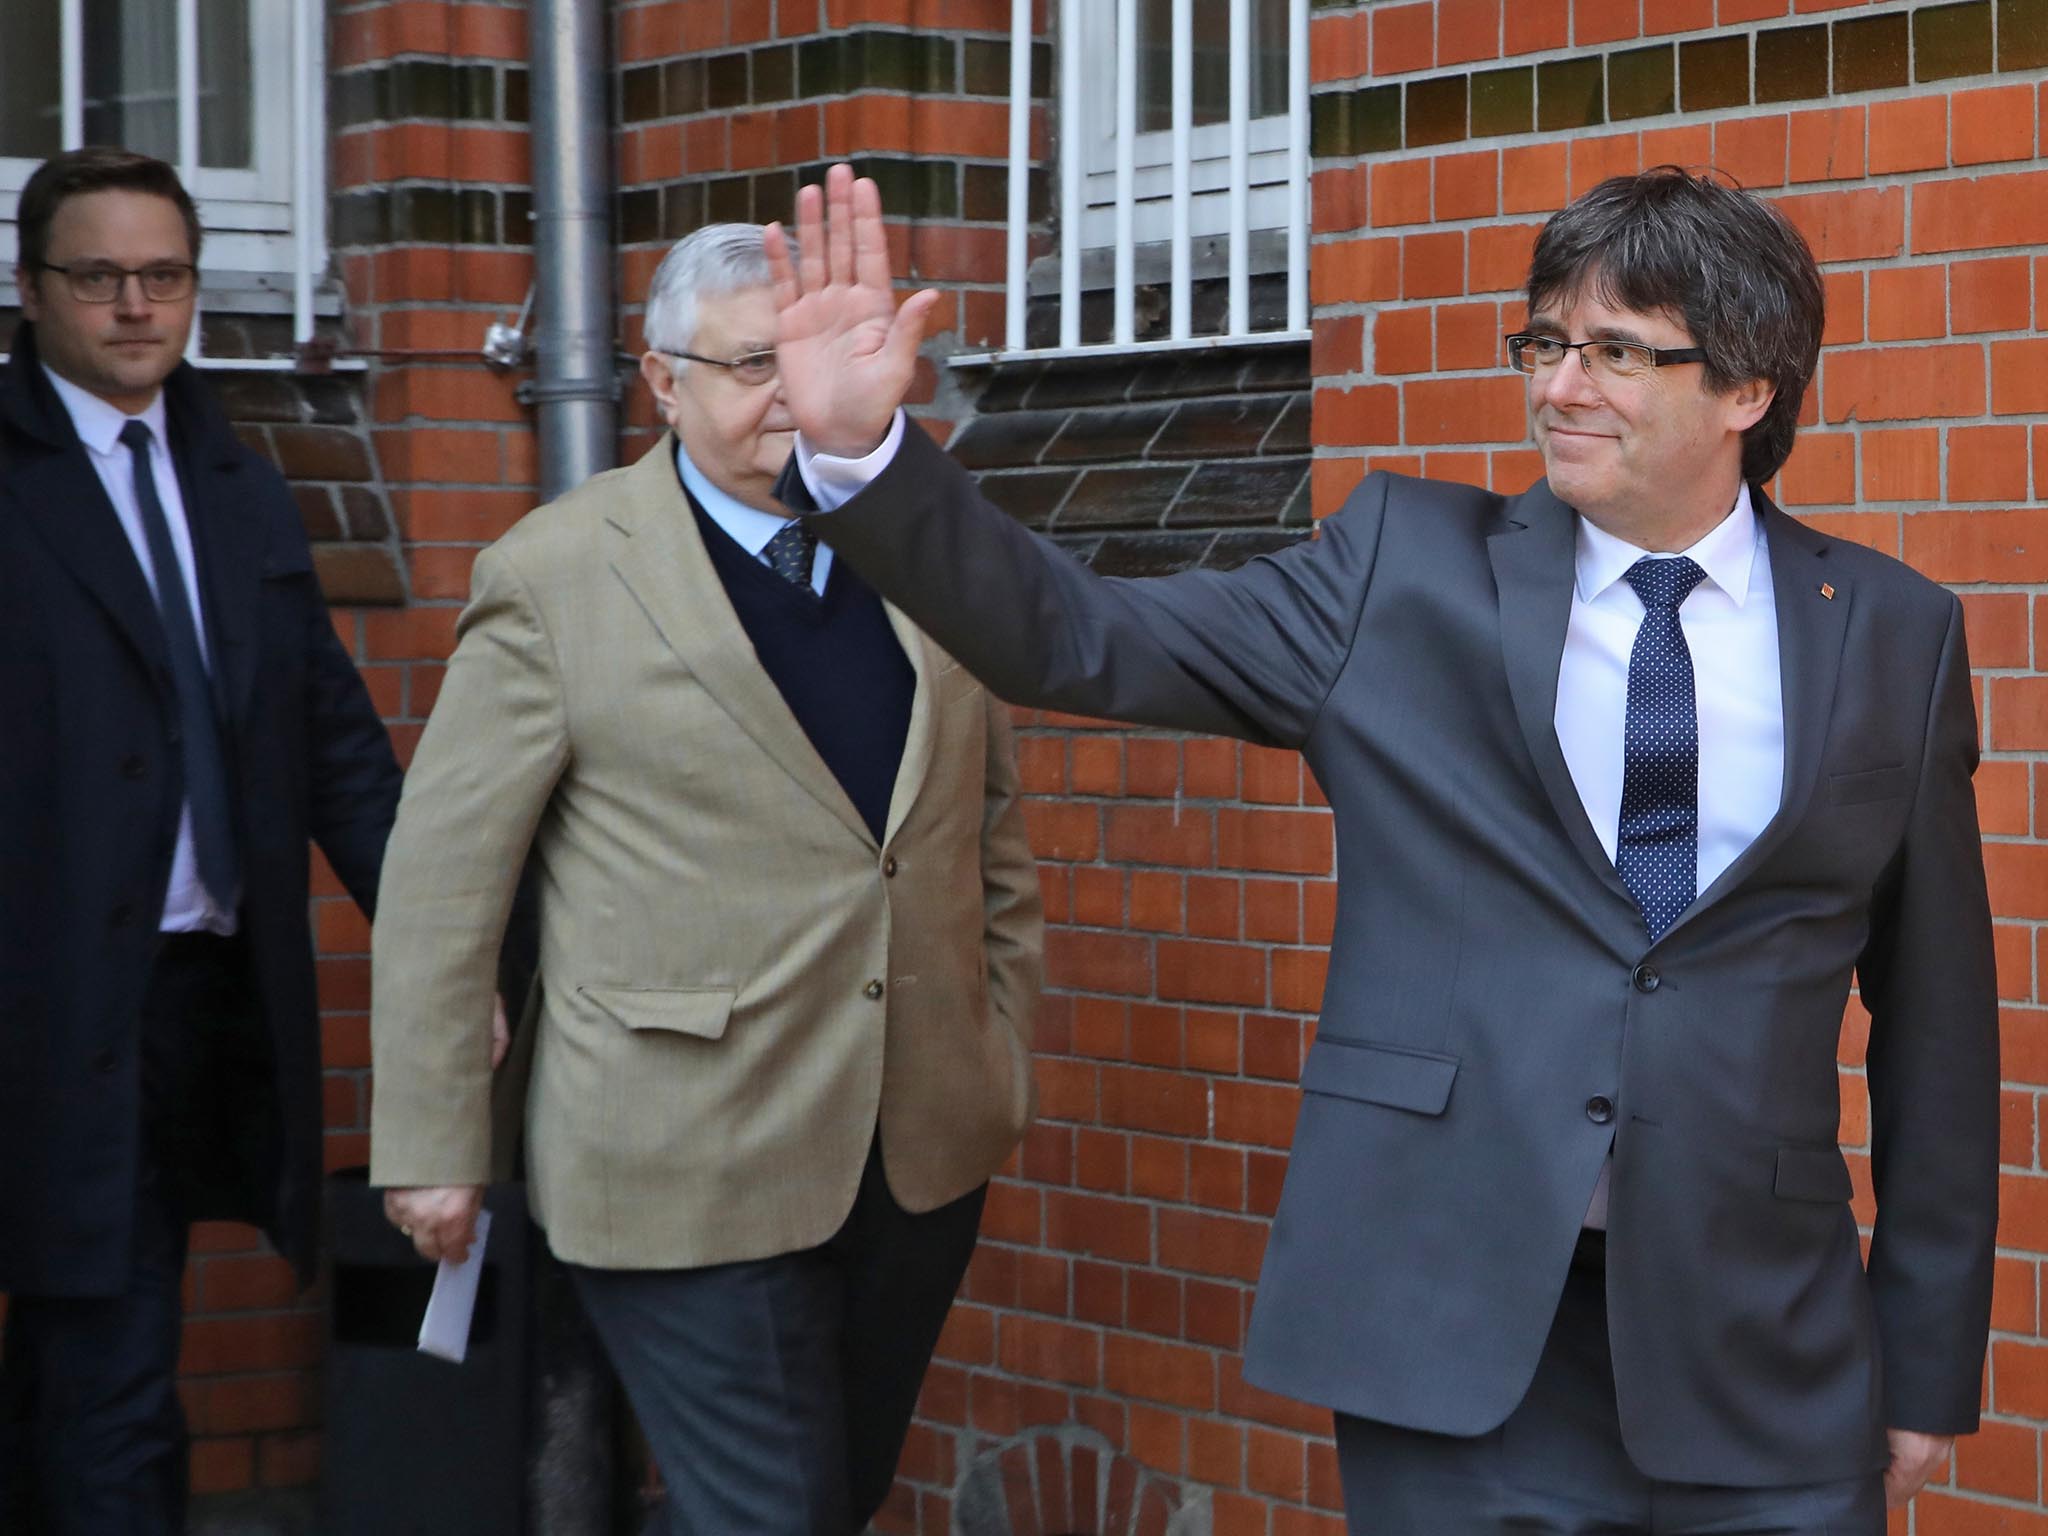 Carles Puigdemont and political colleagues give the thumbs-up after last year's referendum